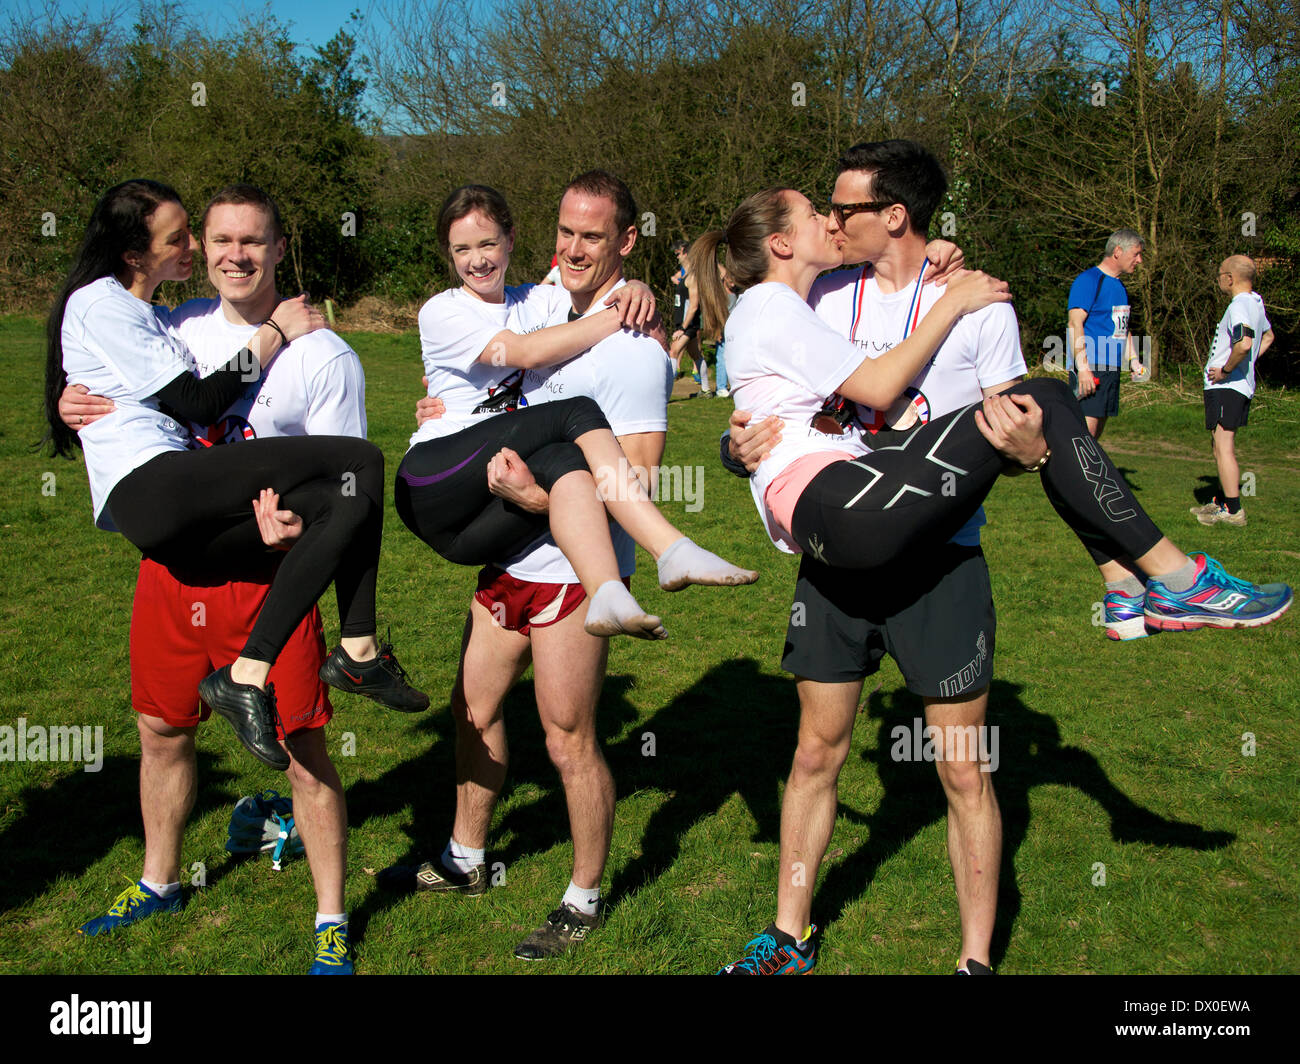 Dorking, Surrey. Sunday 16th March 2014. The 7th UK Wife Carrying Race takes place at The Nower Dorking. Image shows the three finalists with Rich Blake Smith and 55kg Anna in the middle, in second place on the left is Vytautas Kirkliauskas with 52kg wife Neringa Kirkliauskiene and third place on the right, Benjamin Hall and 61kg Gemma Taylor Credit:  Photo by Lindsay Constable/  Alamy Live News Stock Photo